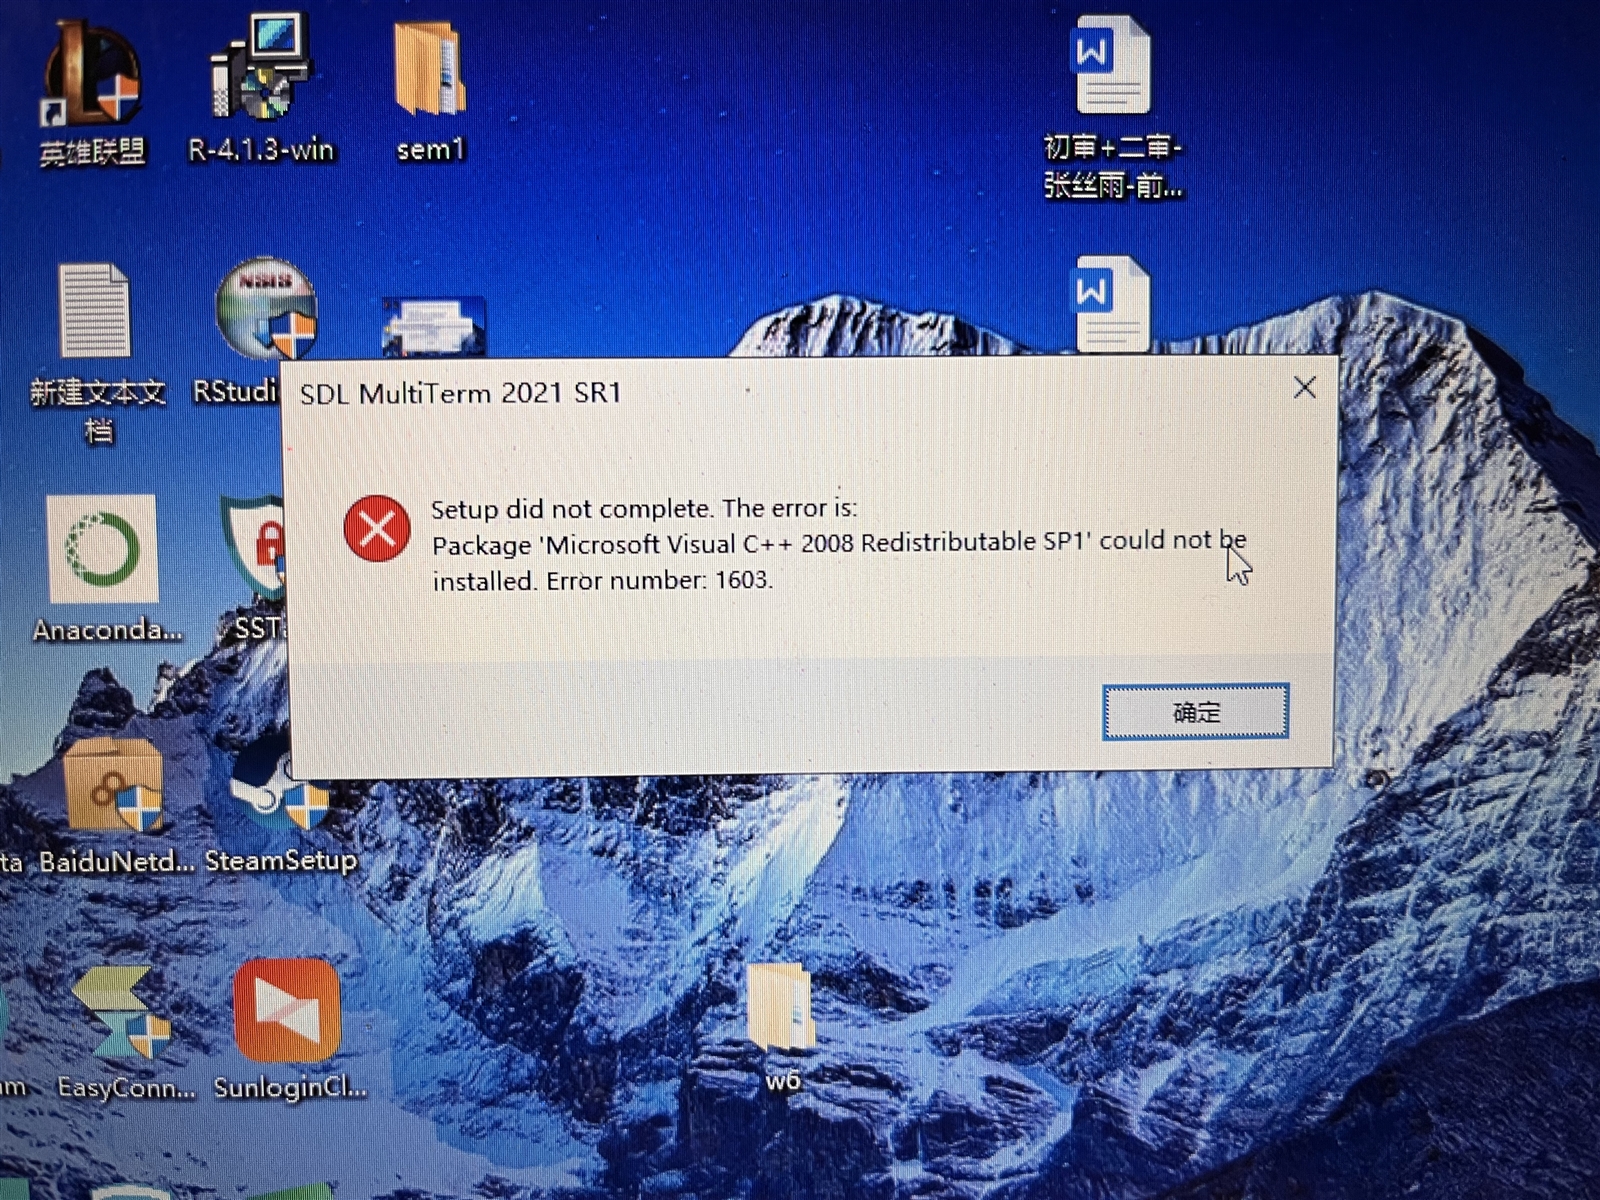 Error message during SDL MultiTerm 2021 SR1 installation stating 'Setup did not complete. The error is: Package 'Microsoft Visual C++ 2008 Redistributable SP1' could not be installed. Error number: 1603.'